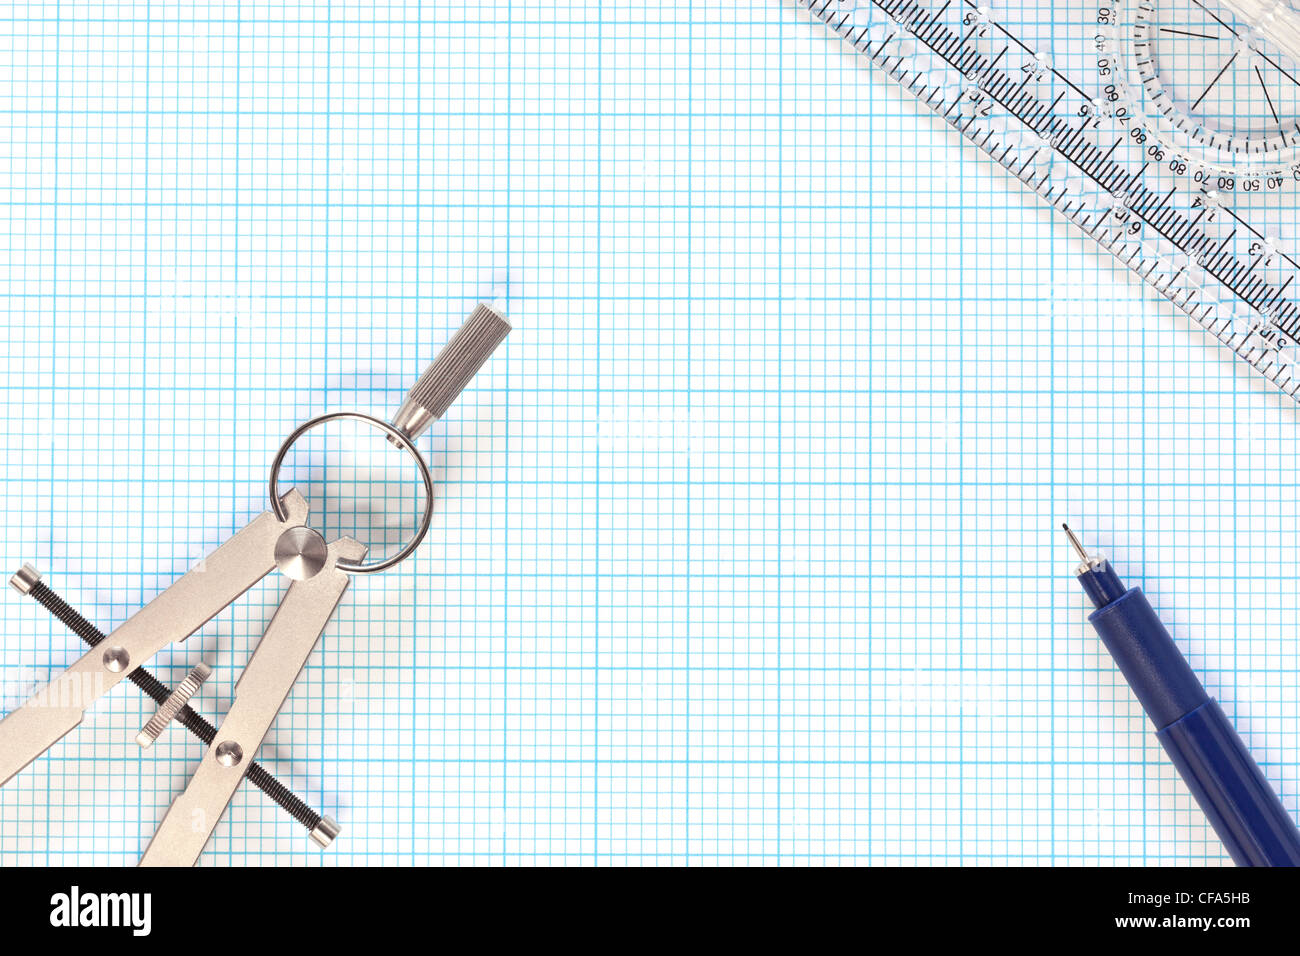 Still life photo of engineering graph paper with a fine 0.1mm pen, compass and protractor ruler Stock Photo